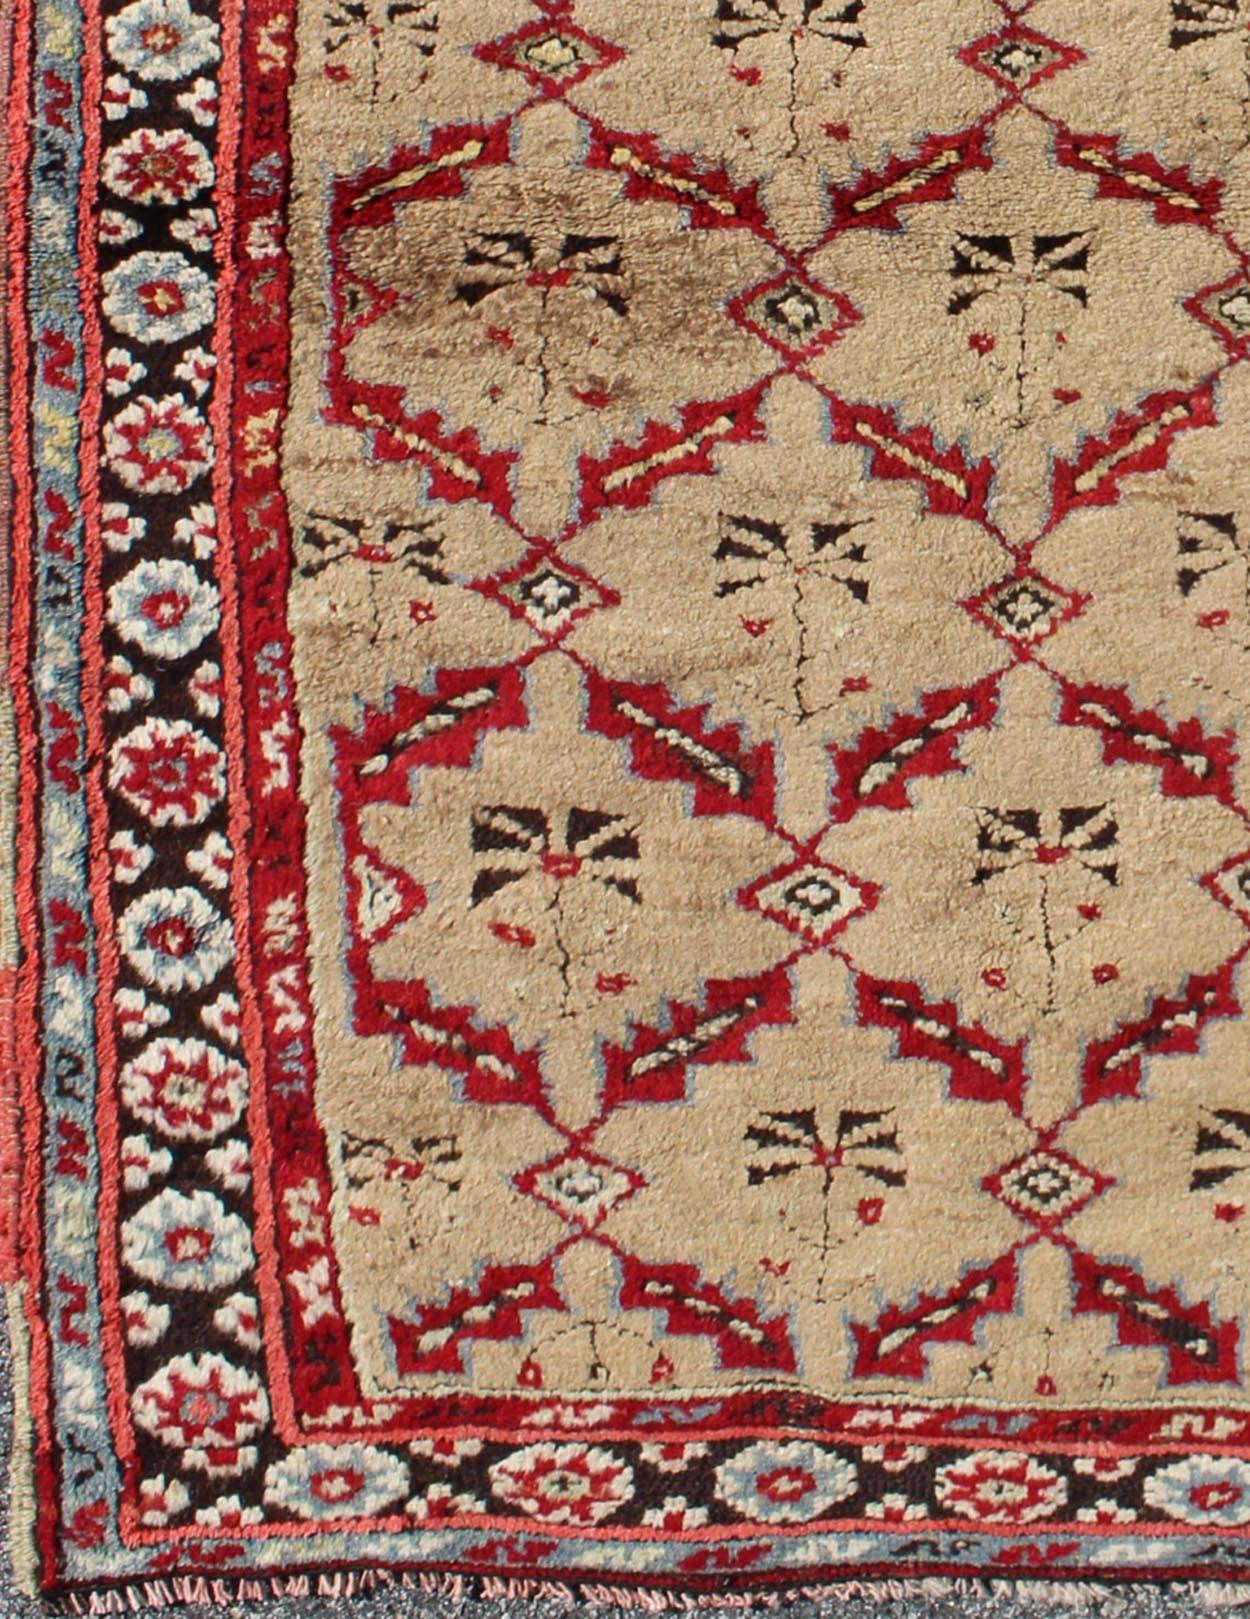  Antique 1930's Turkish Oushak Rug with All-Over Lattice & Geometric Design., Keivan Woven Arts/ rug L11-0912, country of origin / type: Turkey / Oushak, circa 1930

Measures: 3.5 x 4.10

The Light camel ground is home to an all-over lattice design